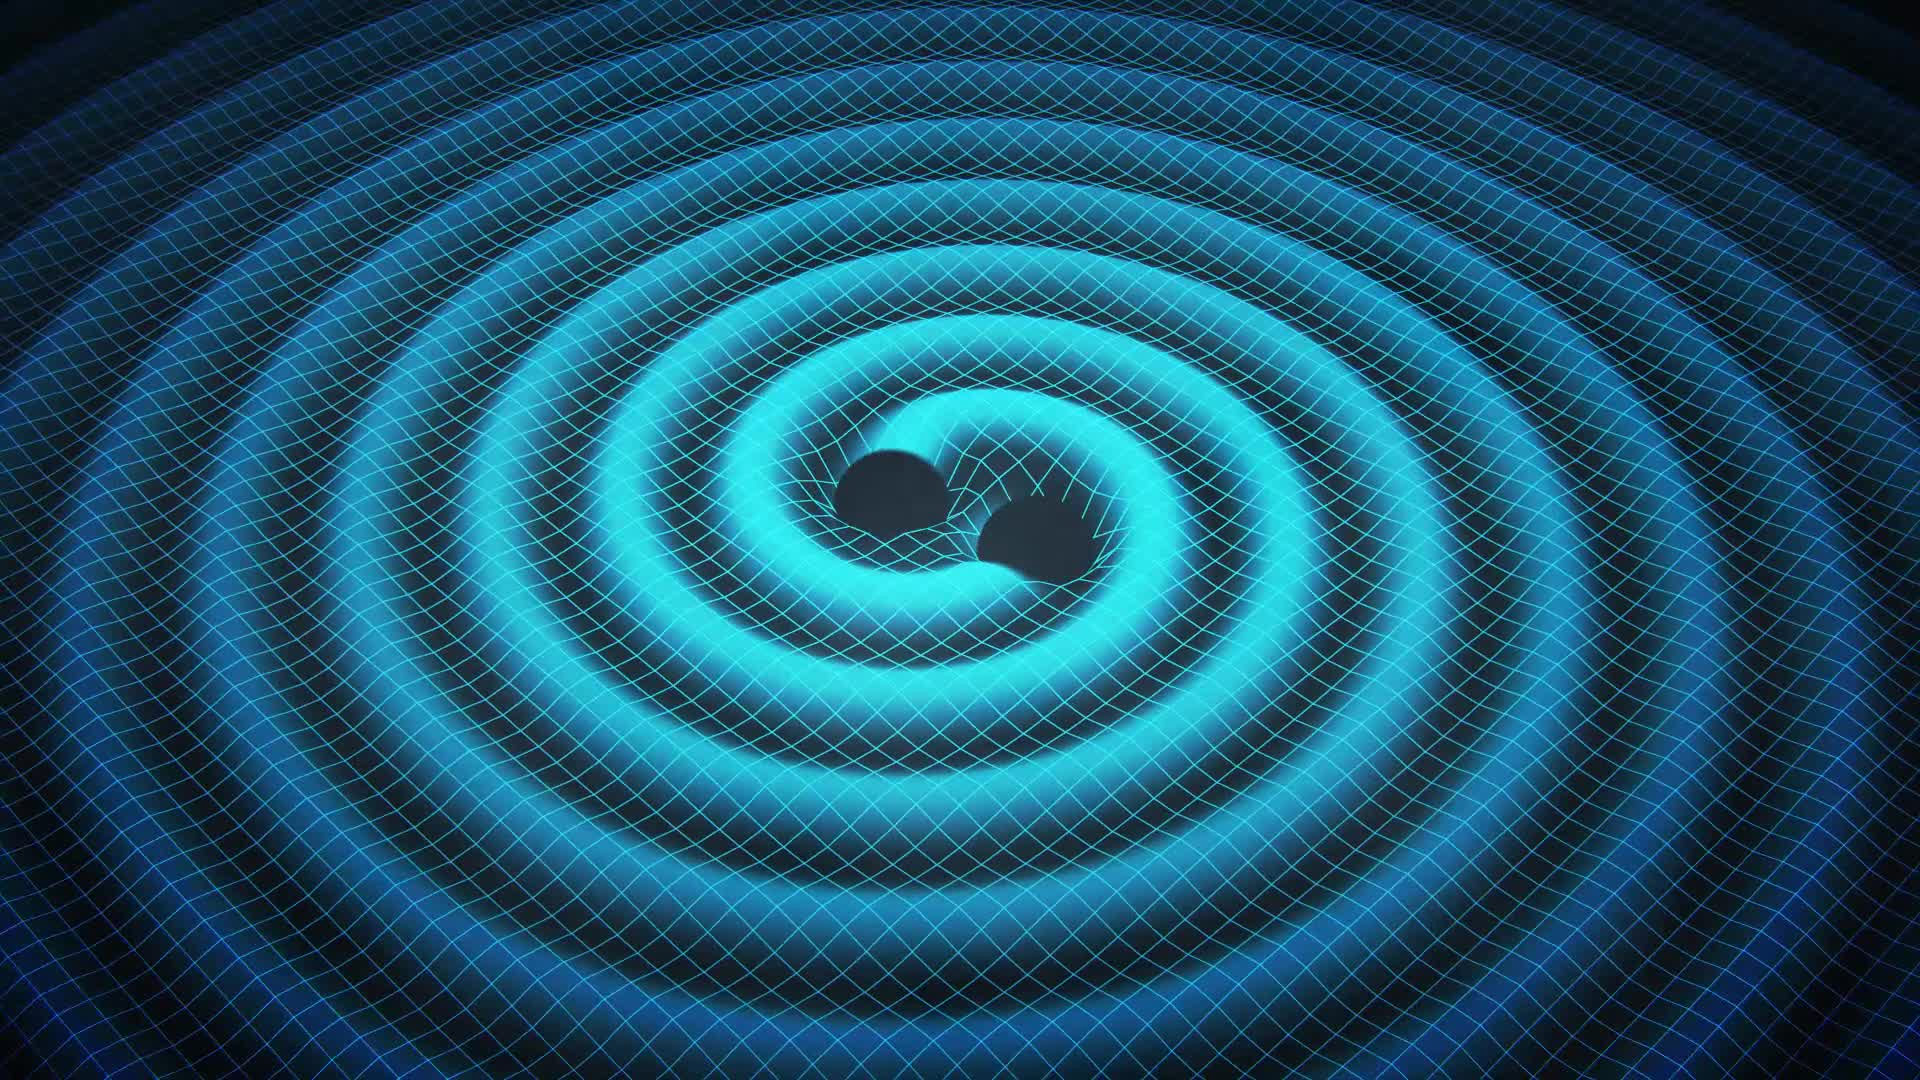 Gravitational waves formed by the merger of two black holes.